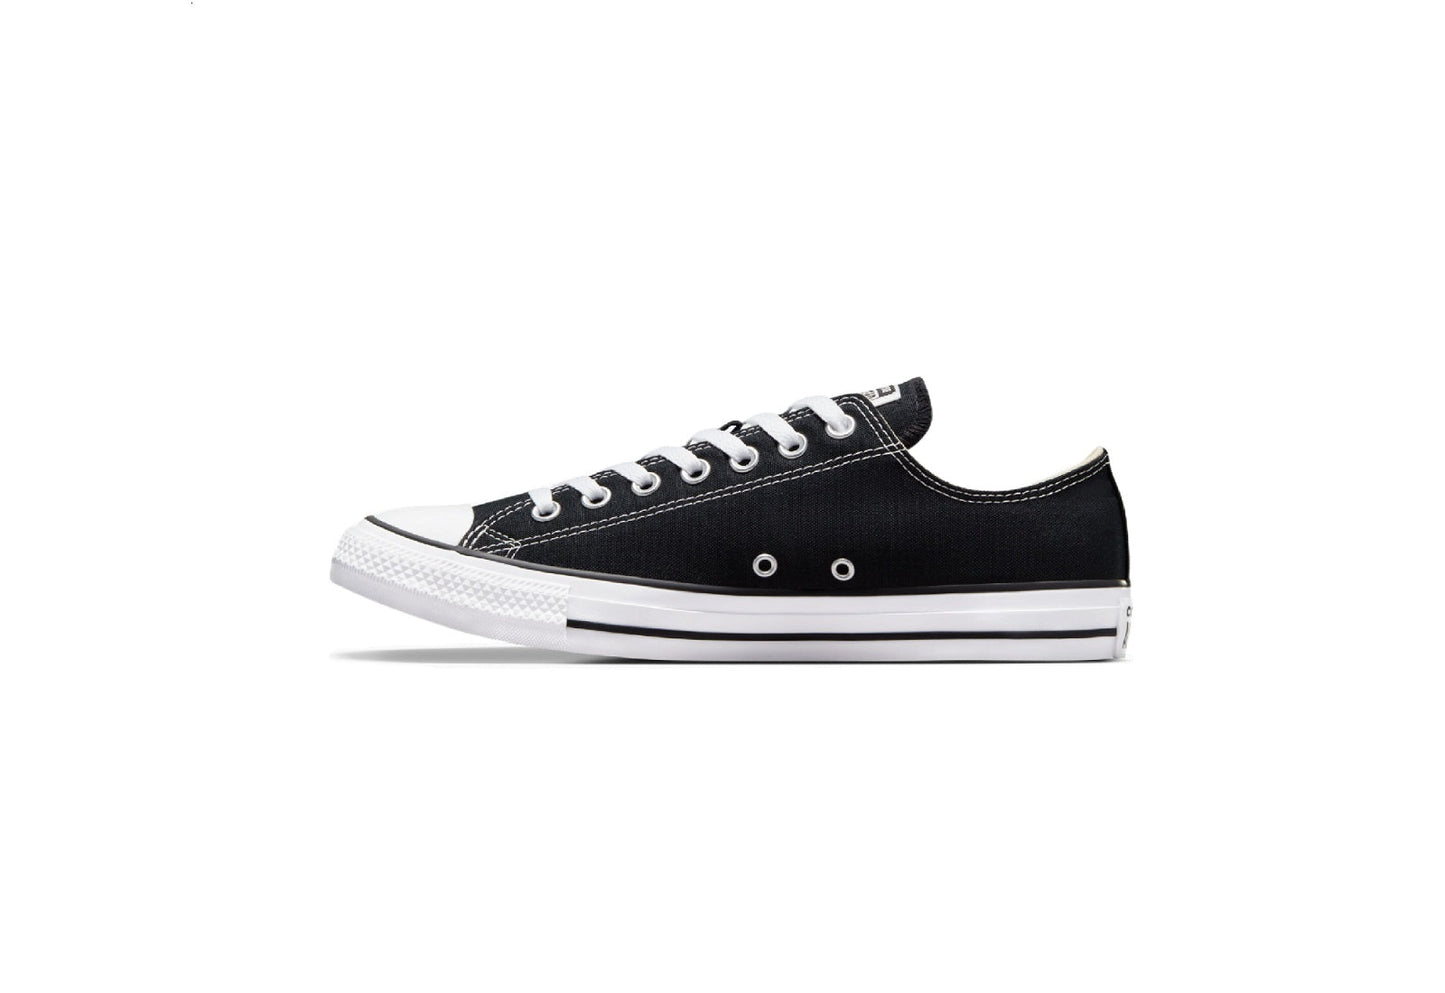 Converse Chuck Taylor All Star Low Top Canvas Sneaker, Black/White (Women)